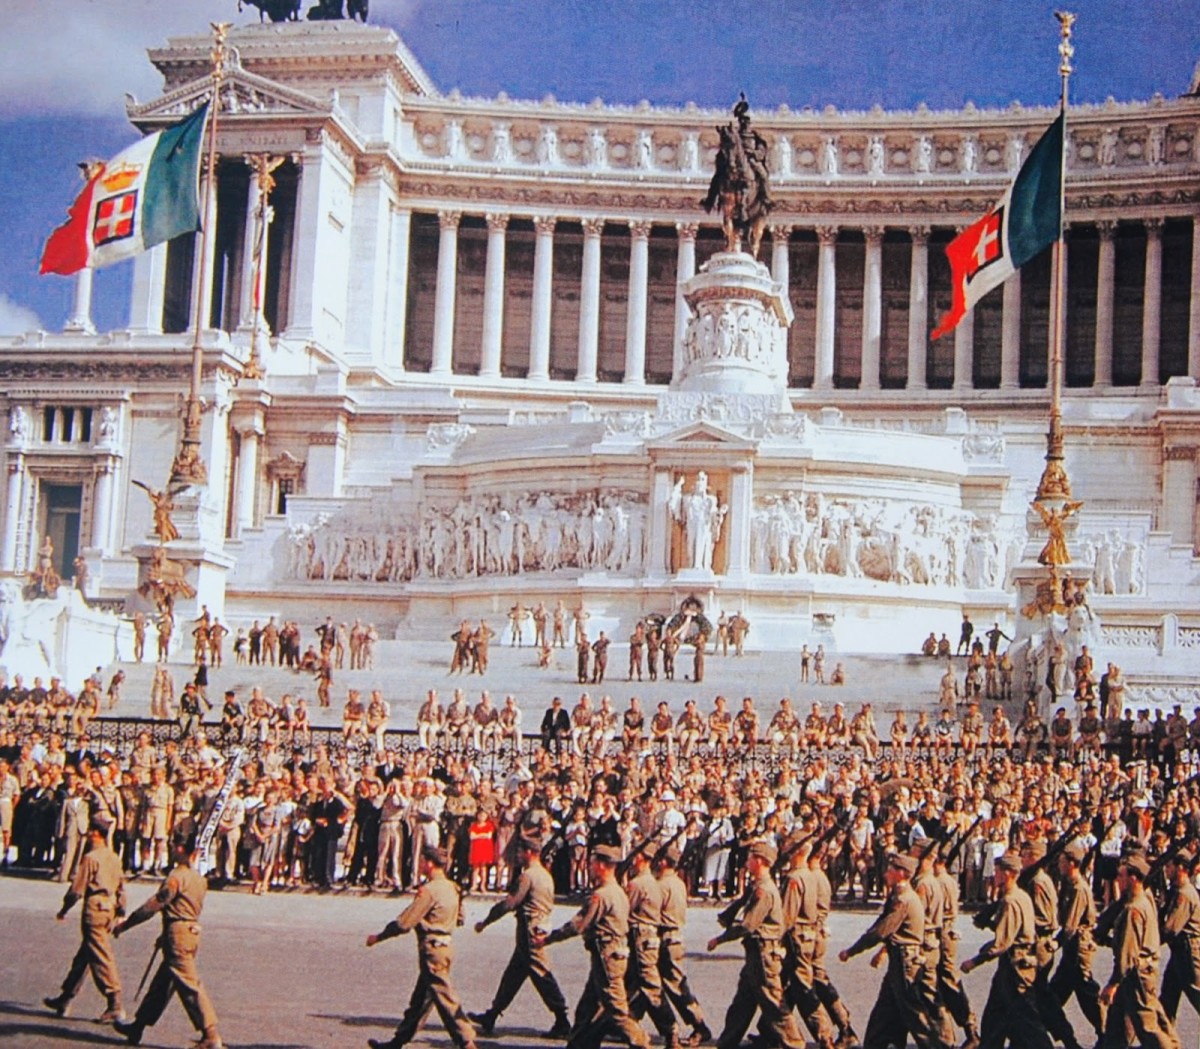 U.S. Troops marching through Rome on June 4, 1944. 